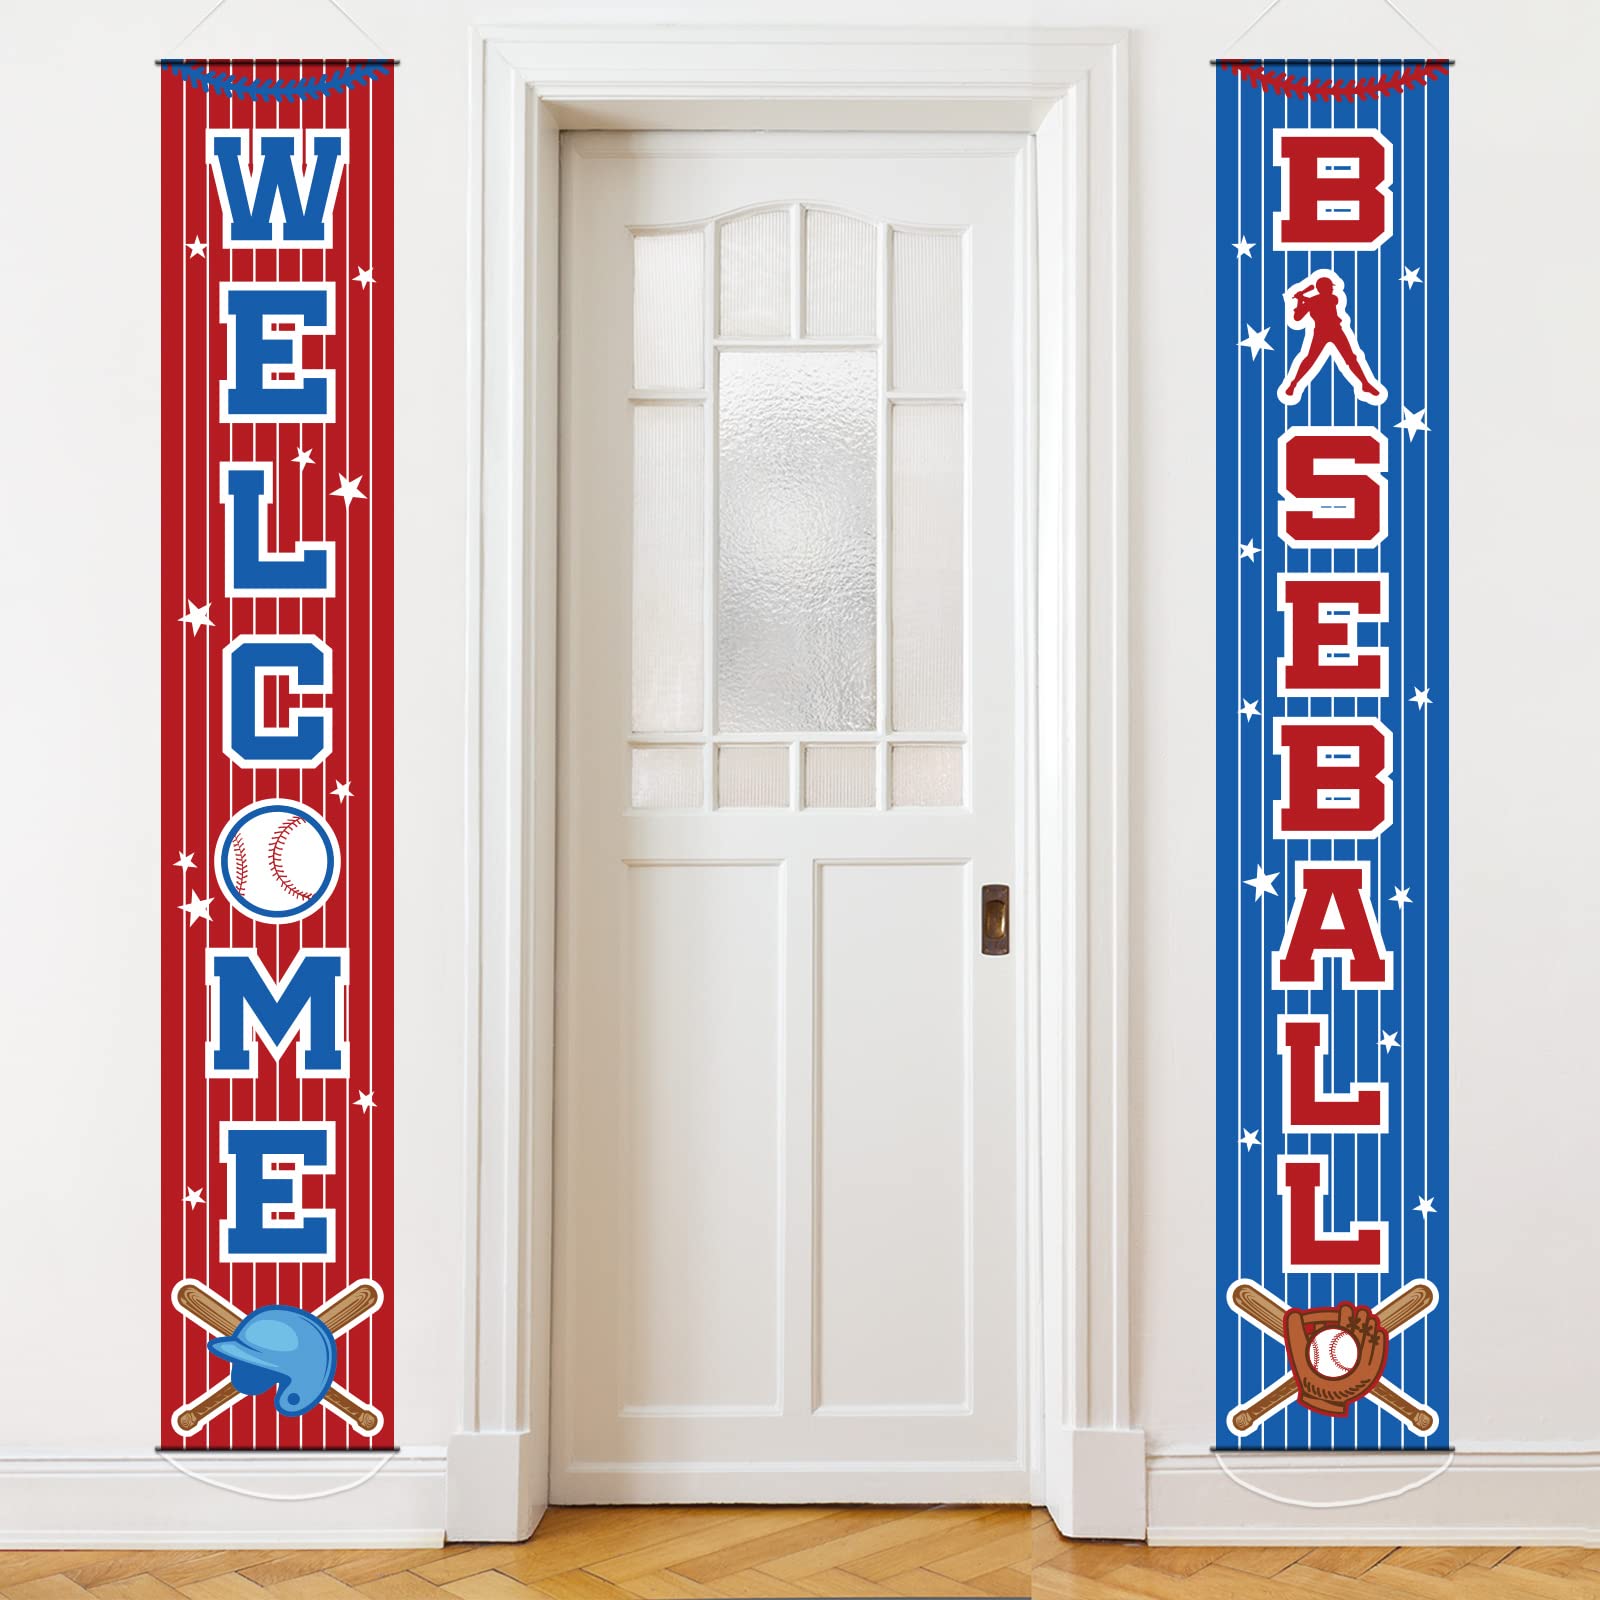 Baseball Party Decorations Baseball Themed Birthday Porch Sign Welcome Door Hanging Banner Baseball Sports Porch Sign for Boy Kid Teenager Baby Shower Baseball Birthday Party Supplies 71 x 12 Inches